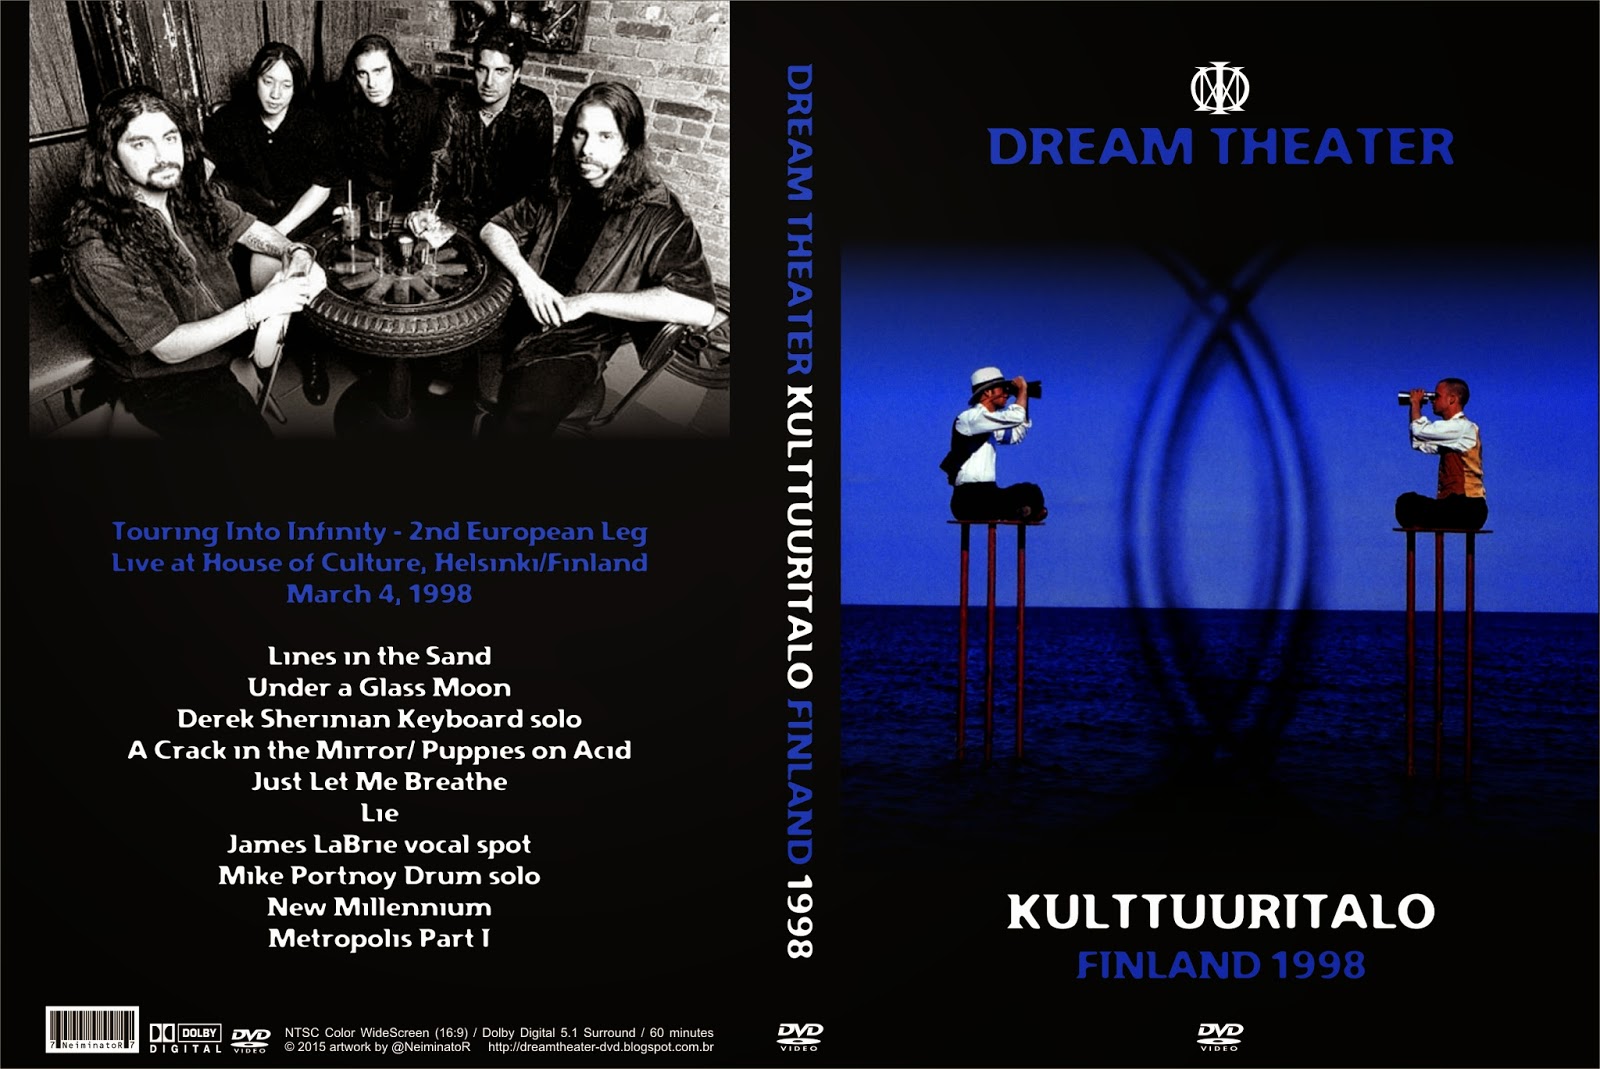 dream theater discography 320 kbps torrent